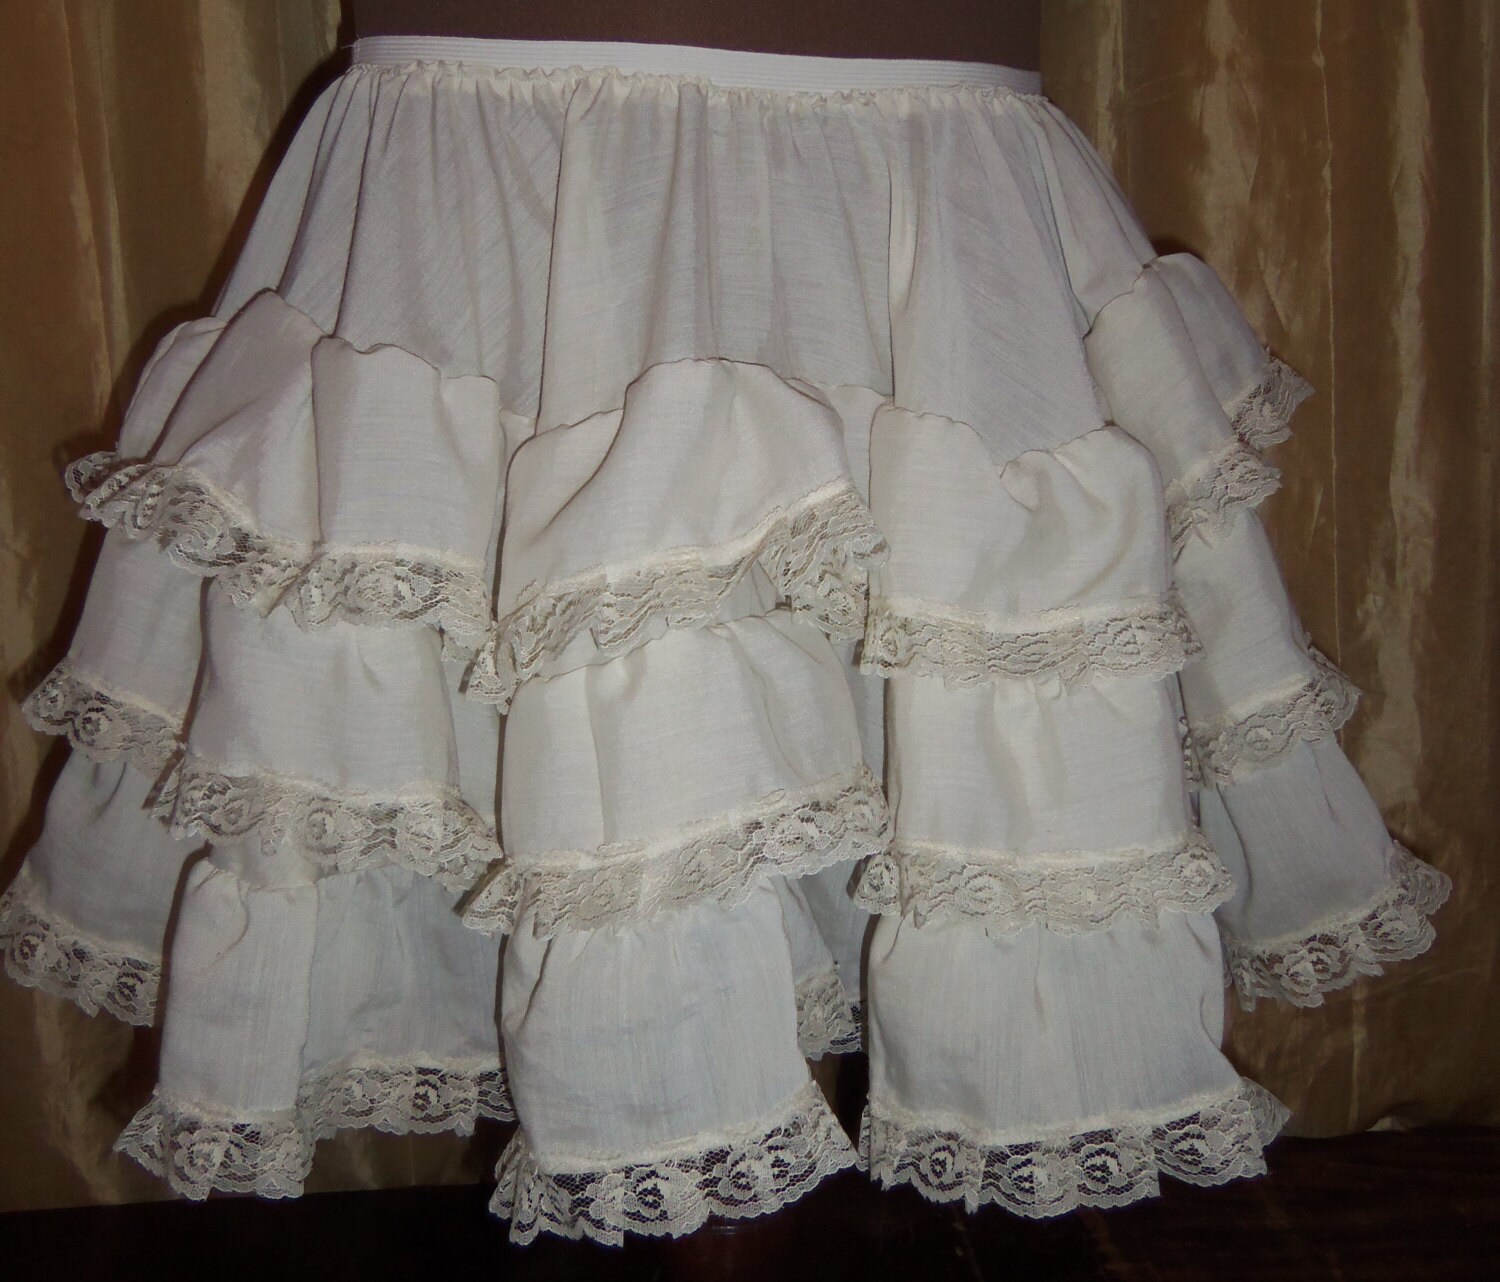 Off White Lace Under Skirt Petticoat Great for Pirate